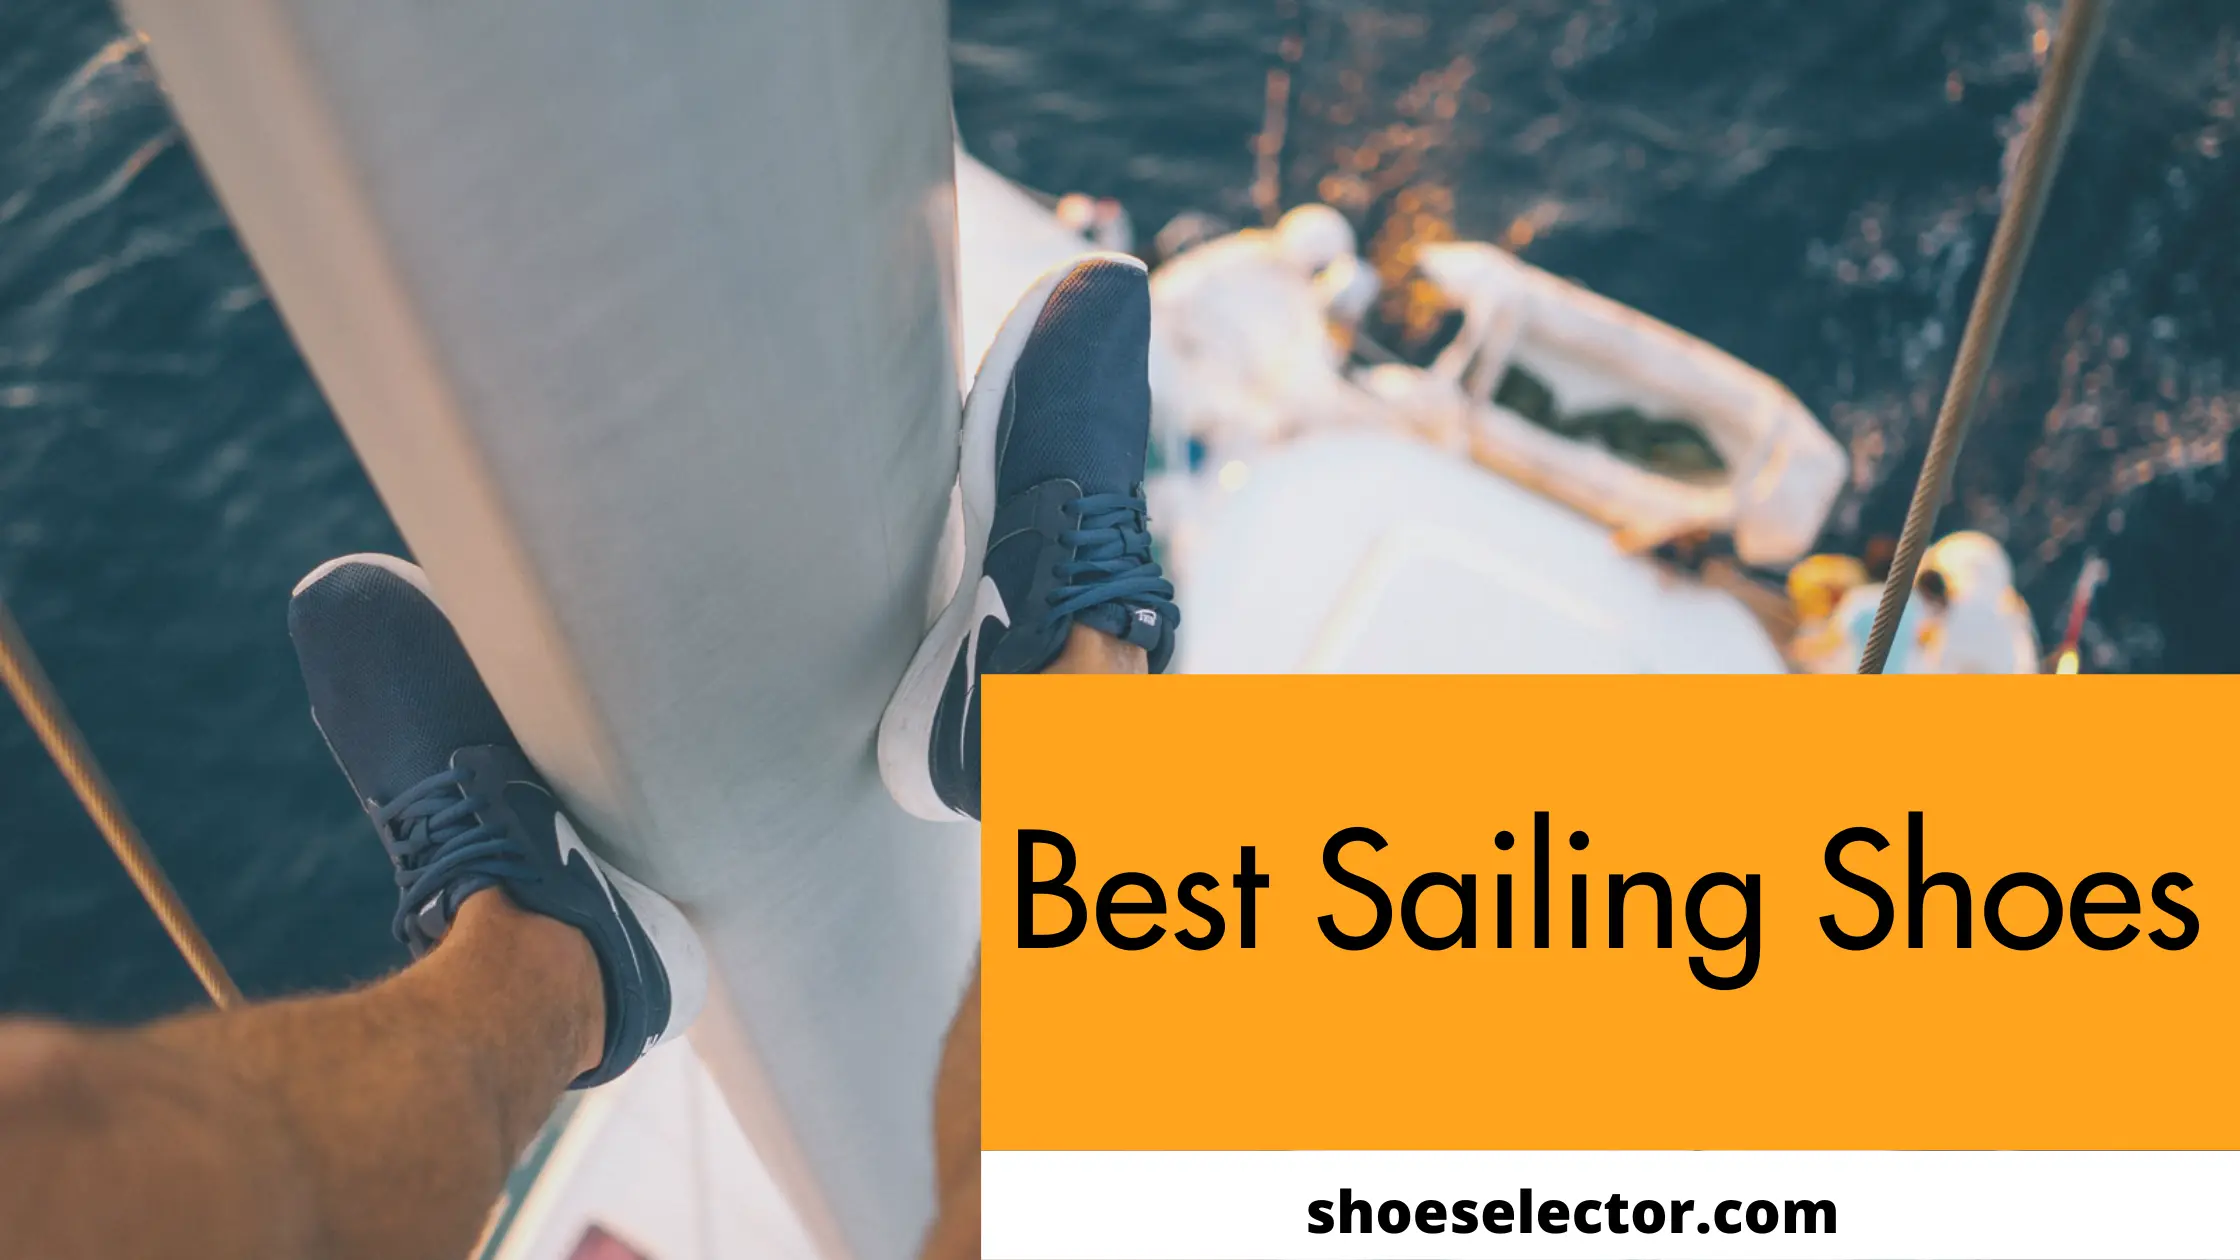 Best Sailing Shoes - Supportive And Stylish